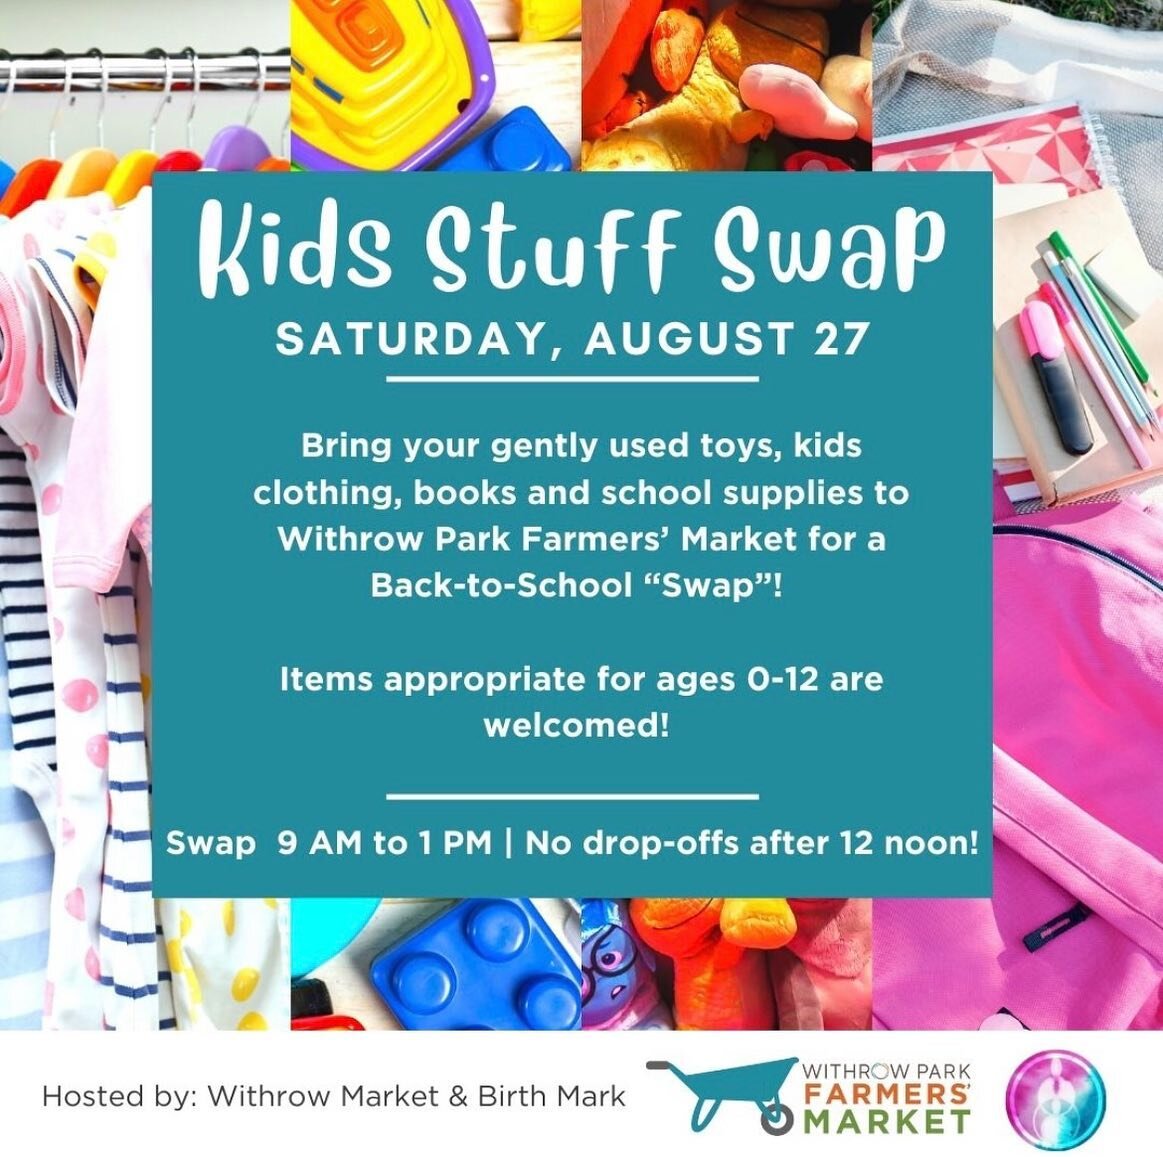 We're so excited to be partnering with @withrowmarket for their Kids &quot;Stuff&quot; Swap at the end of the month! &thinsp;
&thinsp;
Bring your gently used toys, kids clothing, books and school supplies to Withrow Park Farmers&rsquo; Market on Augu